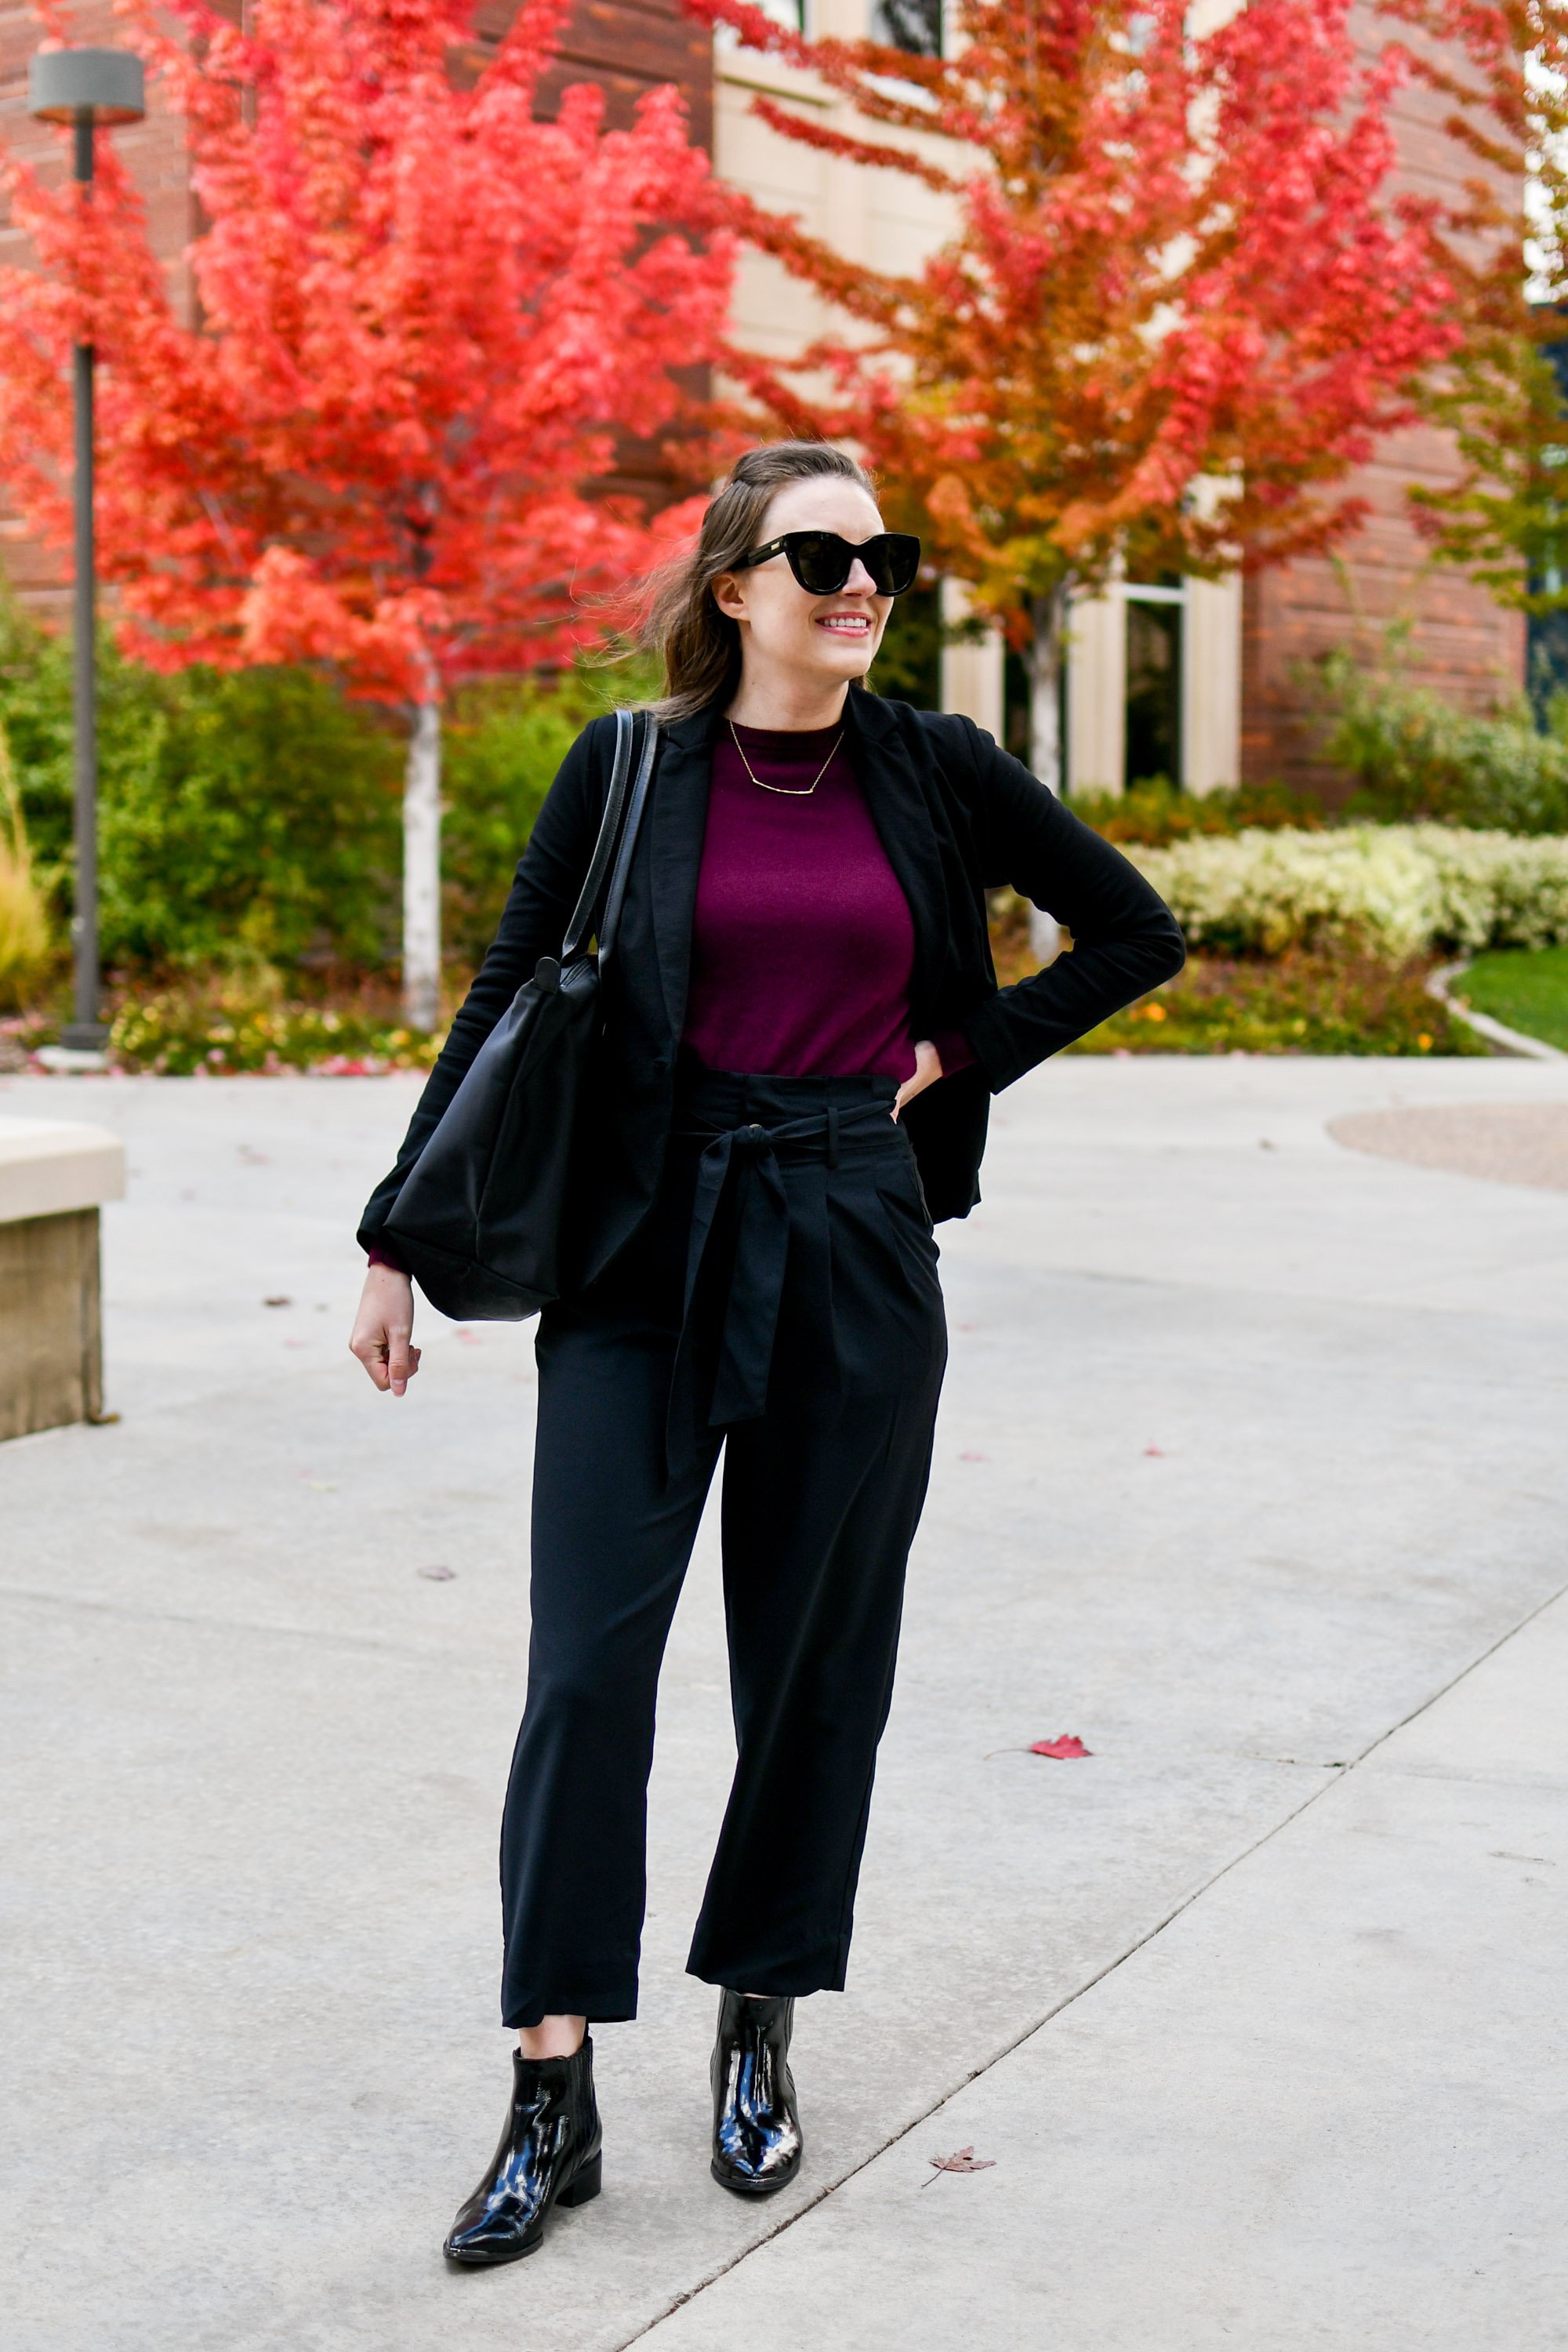 5 Years Later: What to Wear for a Business Casual Work Trip in 2022